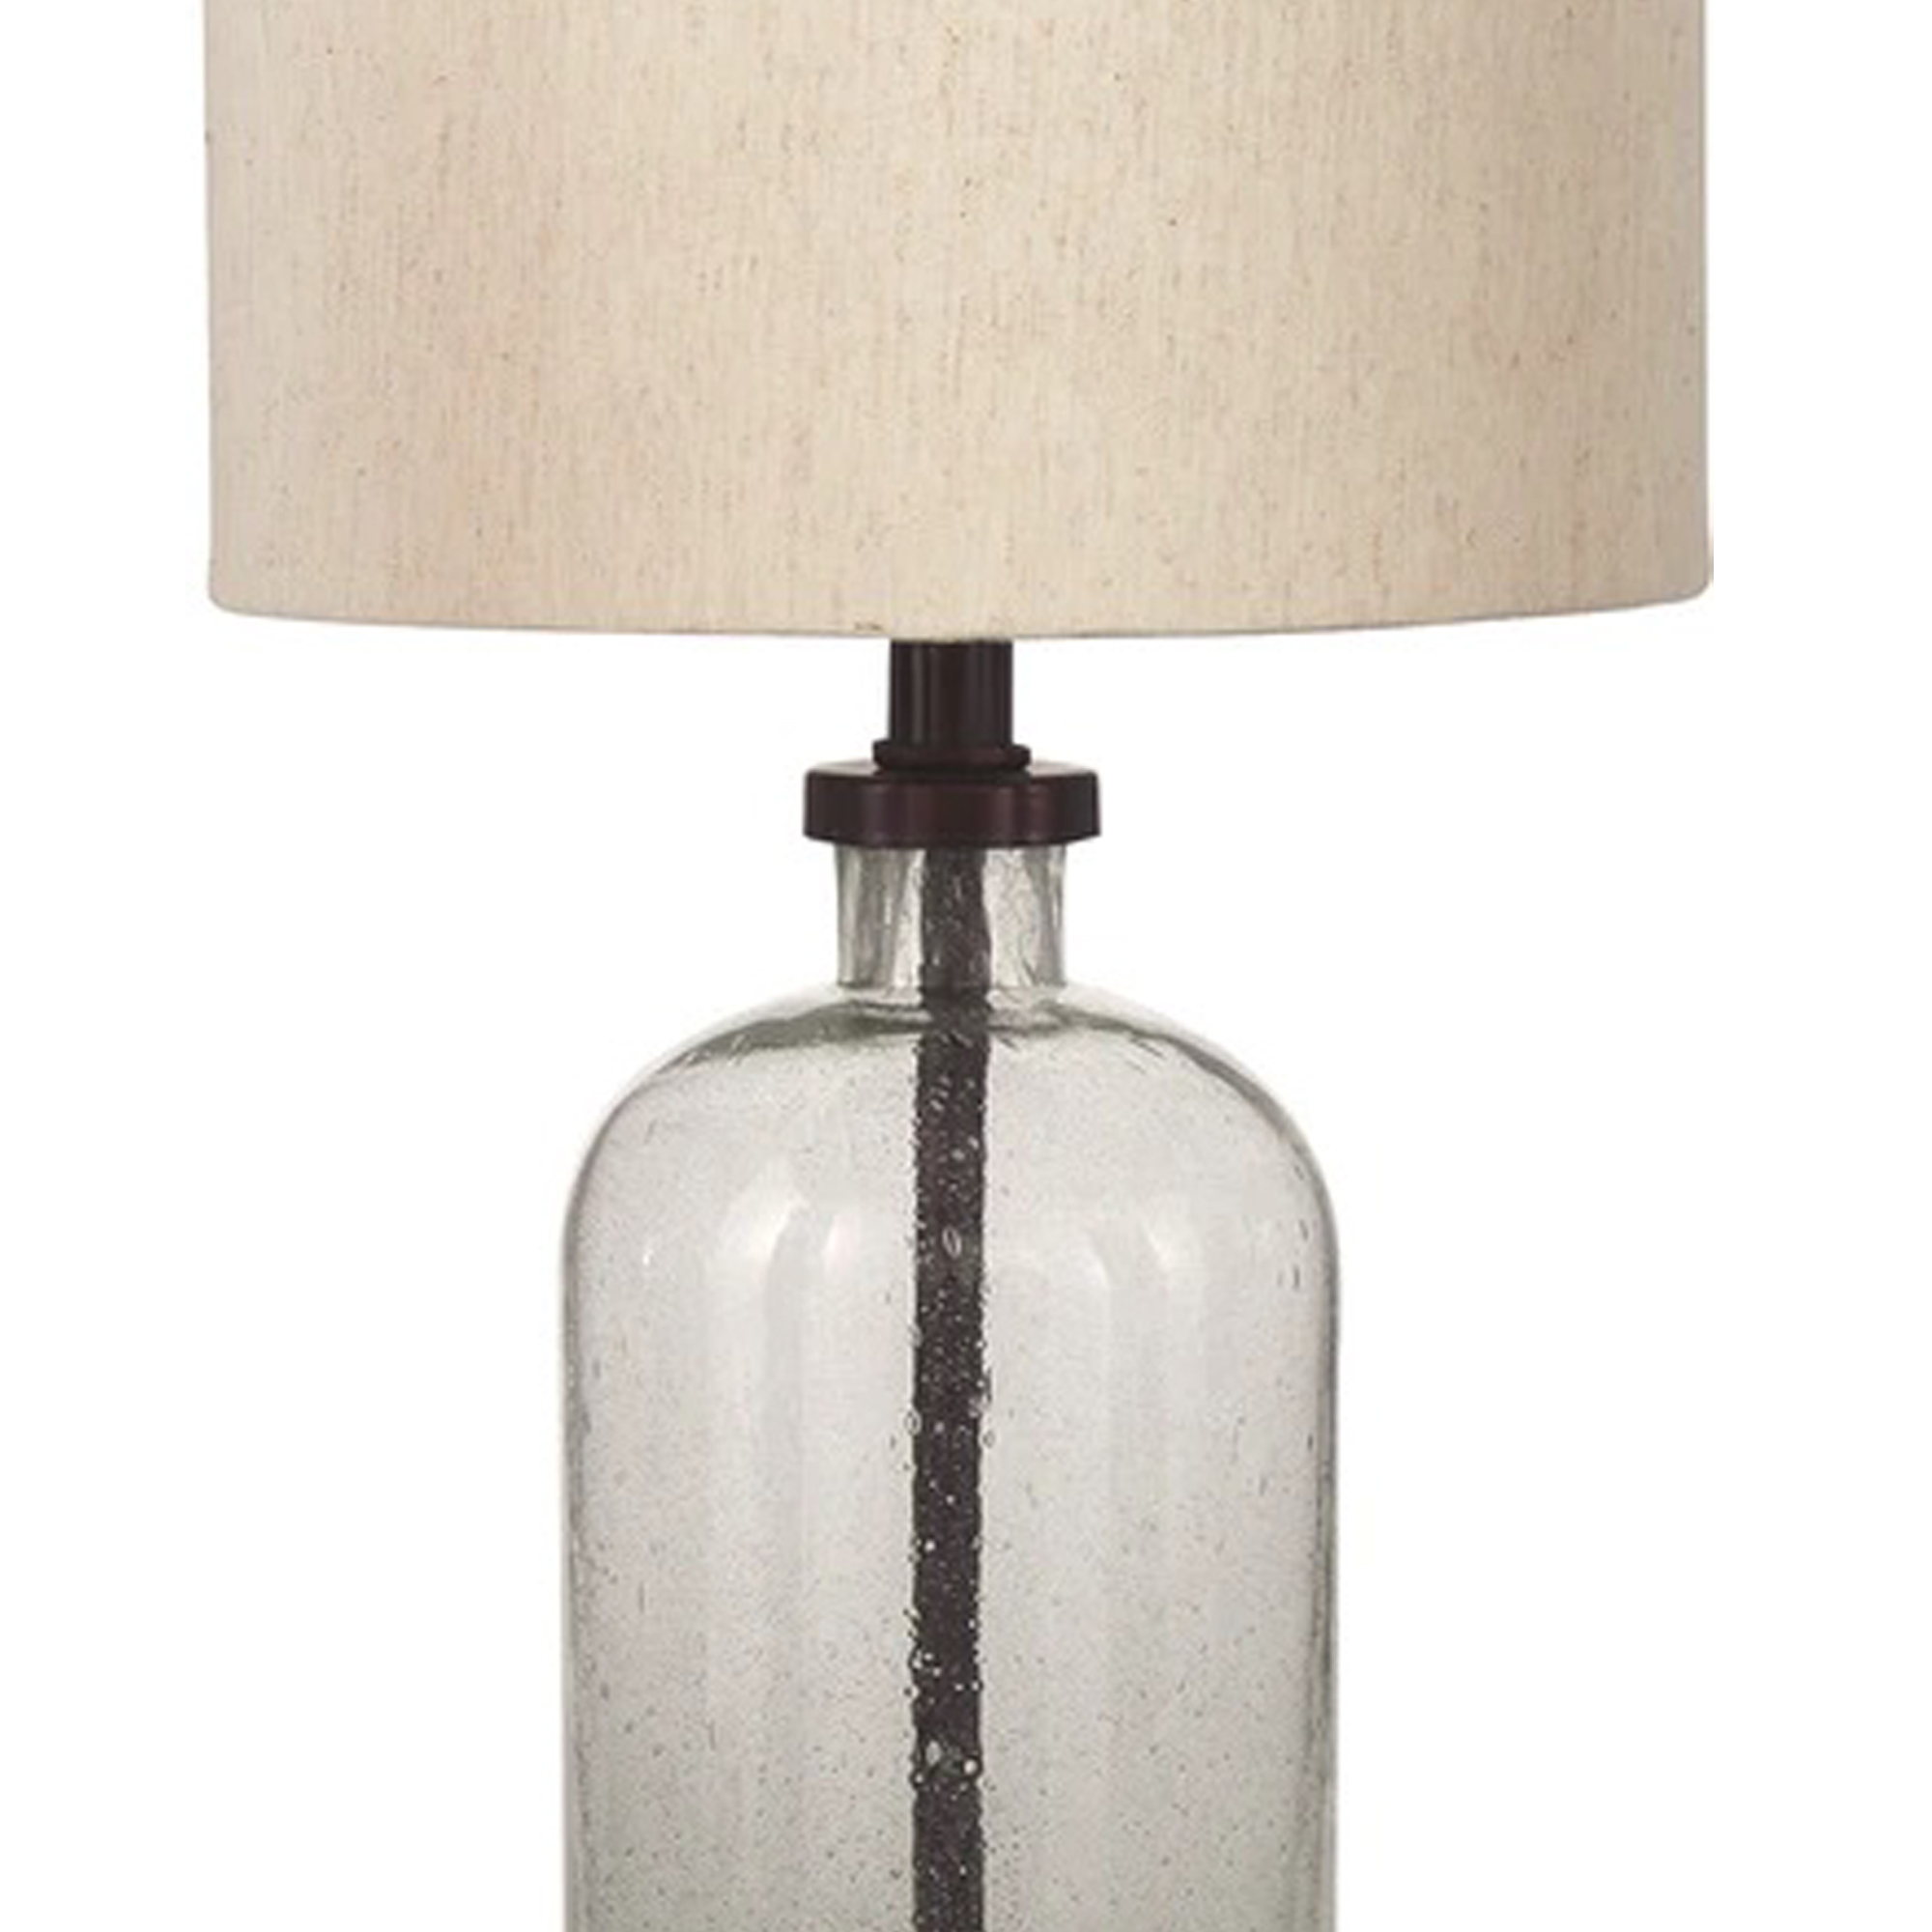 Cylindrical Seeded Glass Table Lamp With Fabric Drum Shade, Beige And Clear- Saltoro Sherpi